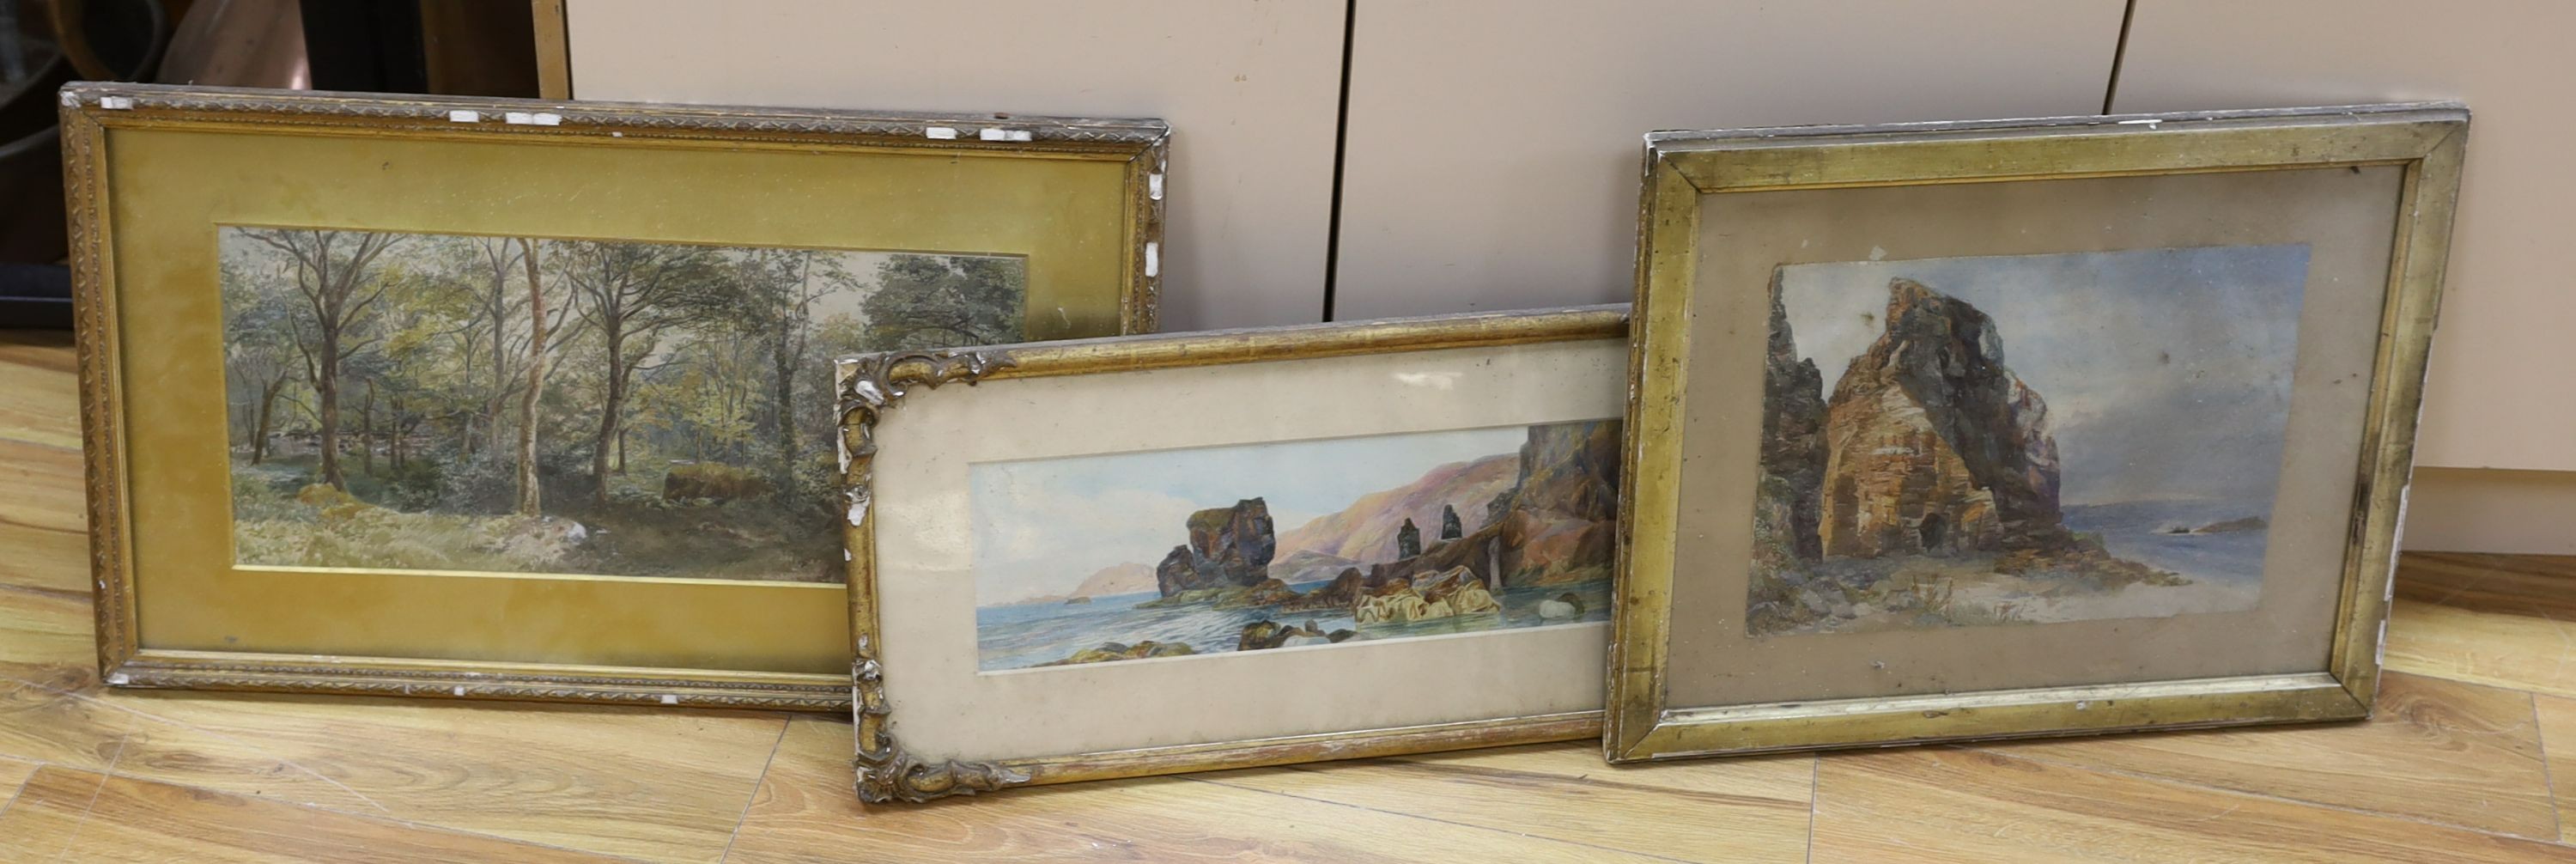 F.E. Thomas (19th C.), three watercolours, 'In a wood, Clackford, South Devon', 'Les Autelets, Sark' and Rocks beside the shore, two with artist labels verso, 24 x 52cm, 14 x 47cm and 27 x 36cm